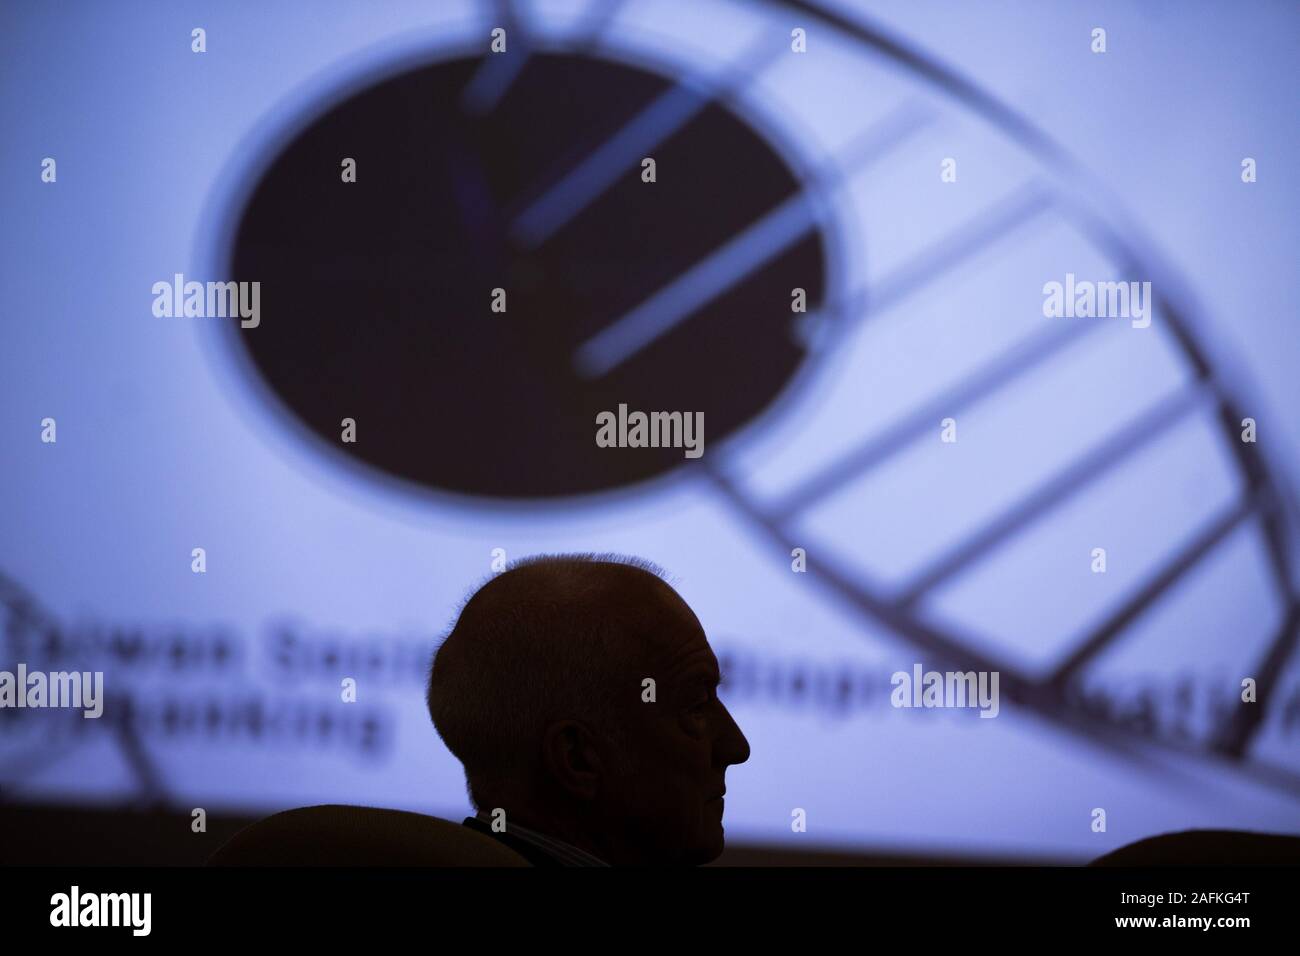 Taipei's Taiwan. 16th Dec, 2019. A man listens to an introduction of the development of Taiwan Biobank during an annual session of the Taiwan Society for Biopreservation and Biobanking in Taipei, southeast China's Taiwan, Dec. 16, 2019. Taiwan Biobank, founded in 2012, aims to expand its gene database to 200,000 individuals by 2024, its principal investigator Lee Te-chang said Monday.TO GO WITH 'Taiwan Biobank to expand gene database to 200,000 individuals by 2024' Credit: Jin Liwang/Xinhua/Alamy Live News Stock Photo